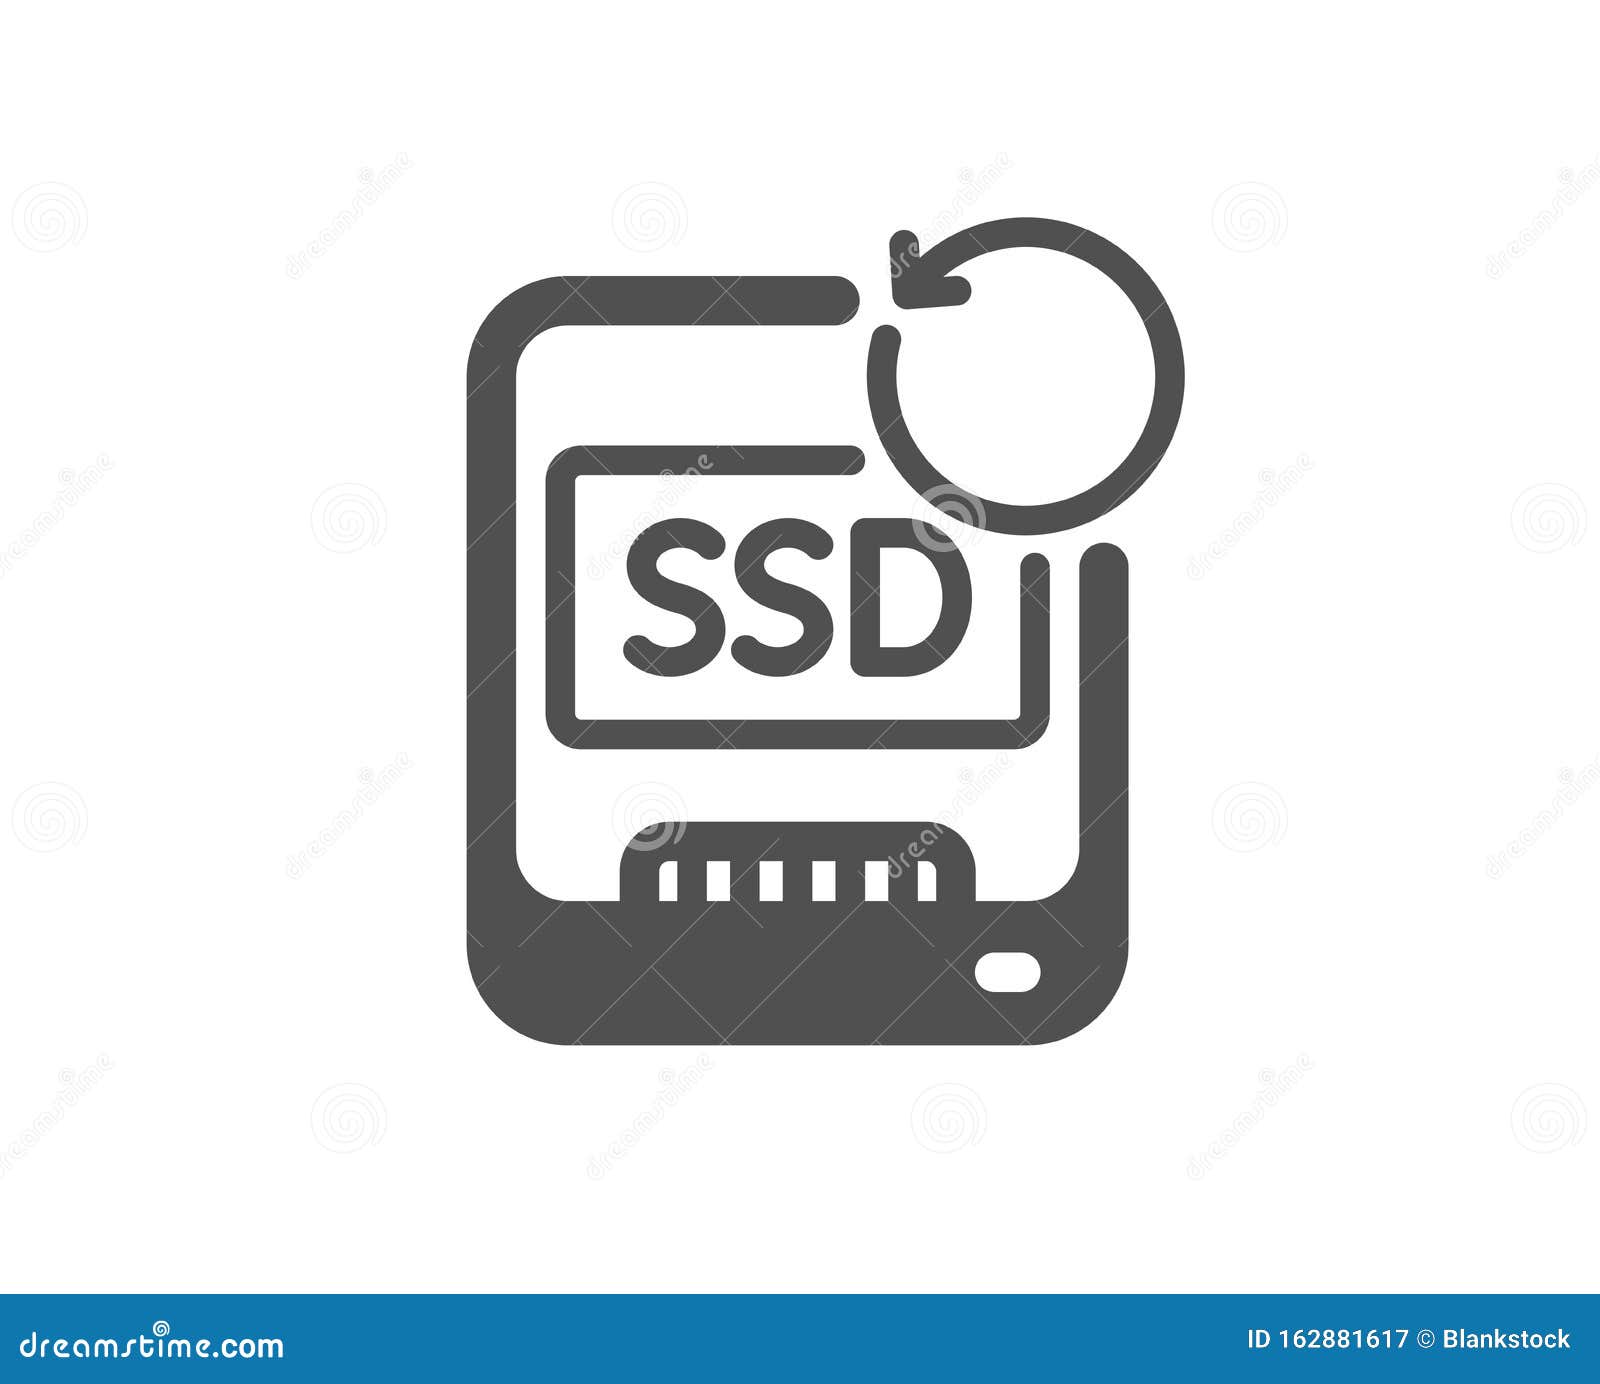 Recovery Ssd Icon. Backup Data Sign. Restore Information. Vector Stock - Illustration of classic, quality: 162881617